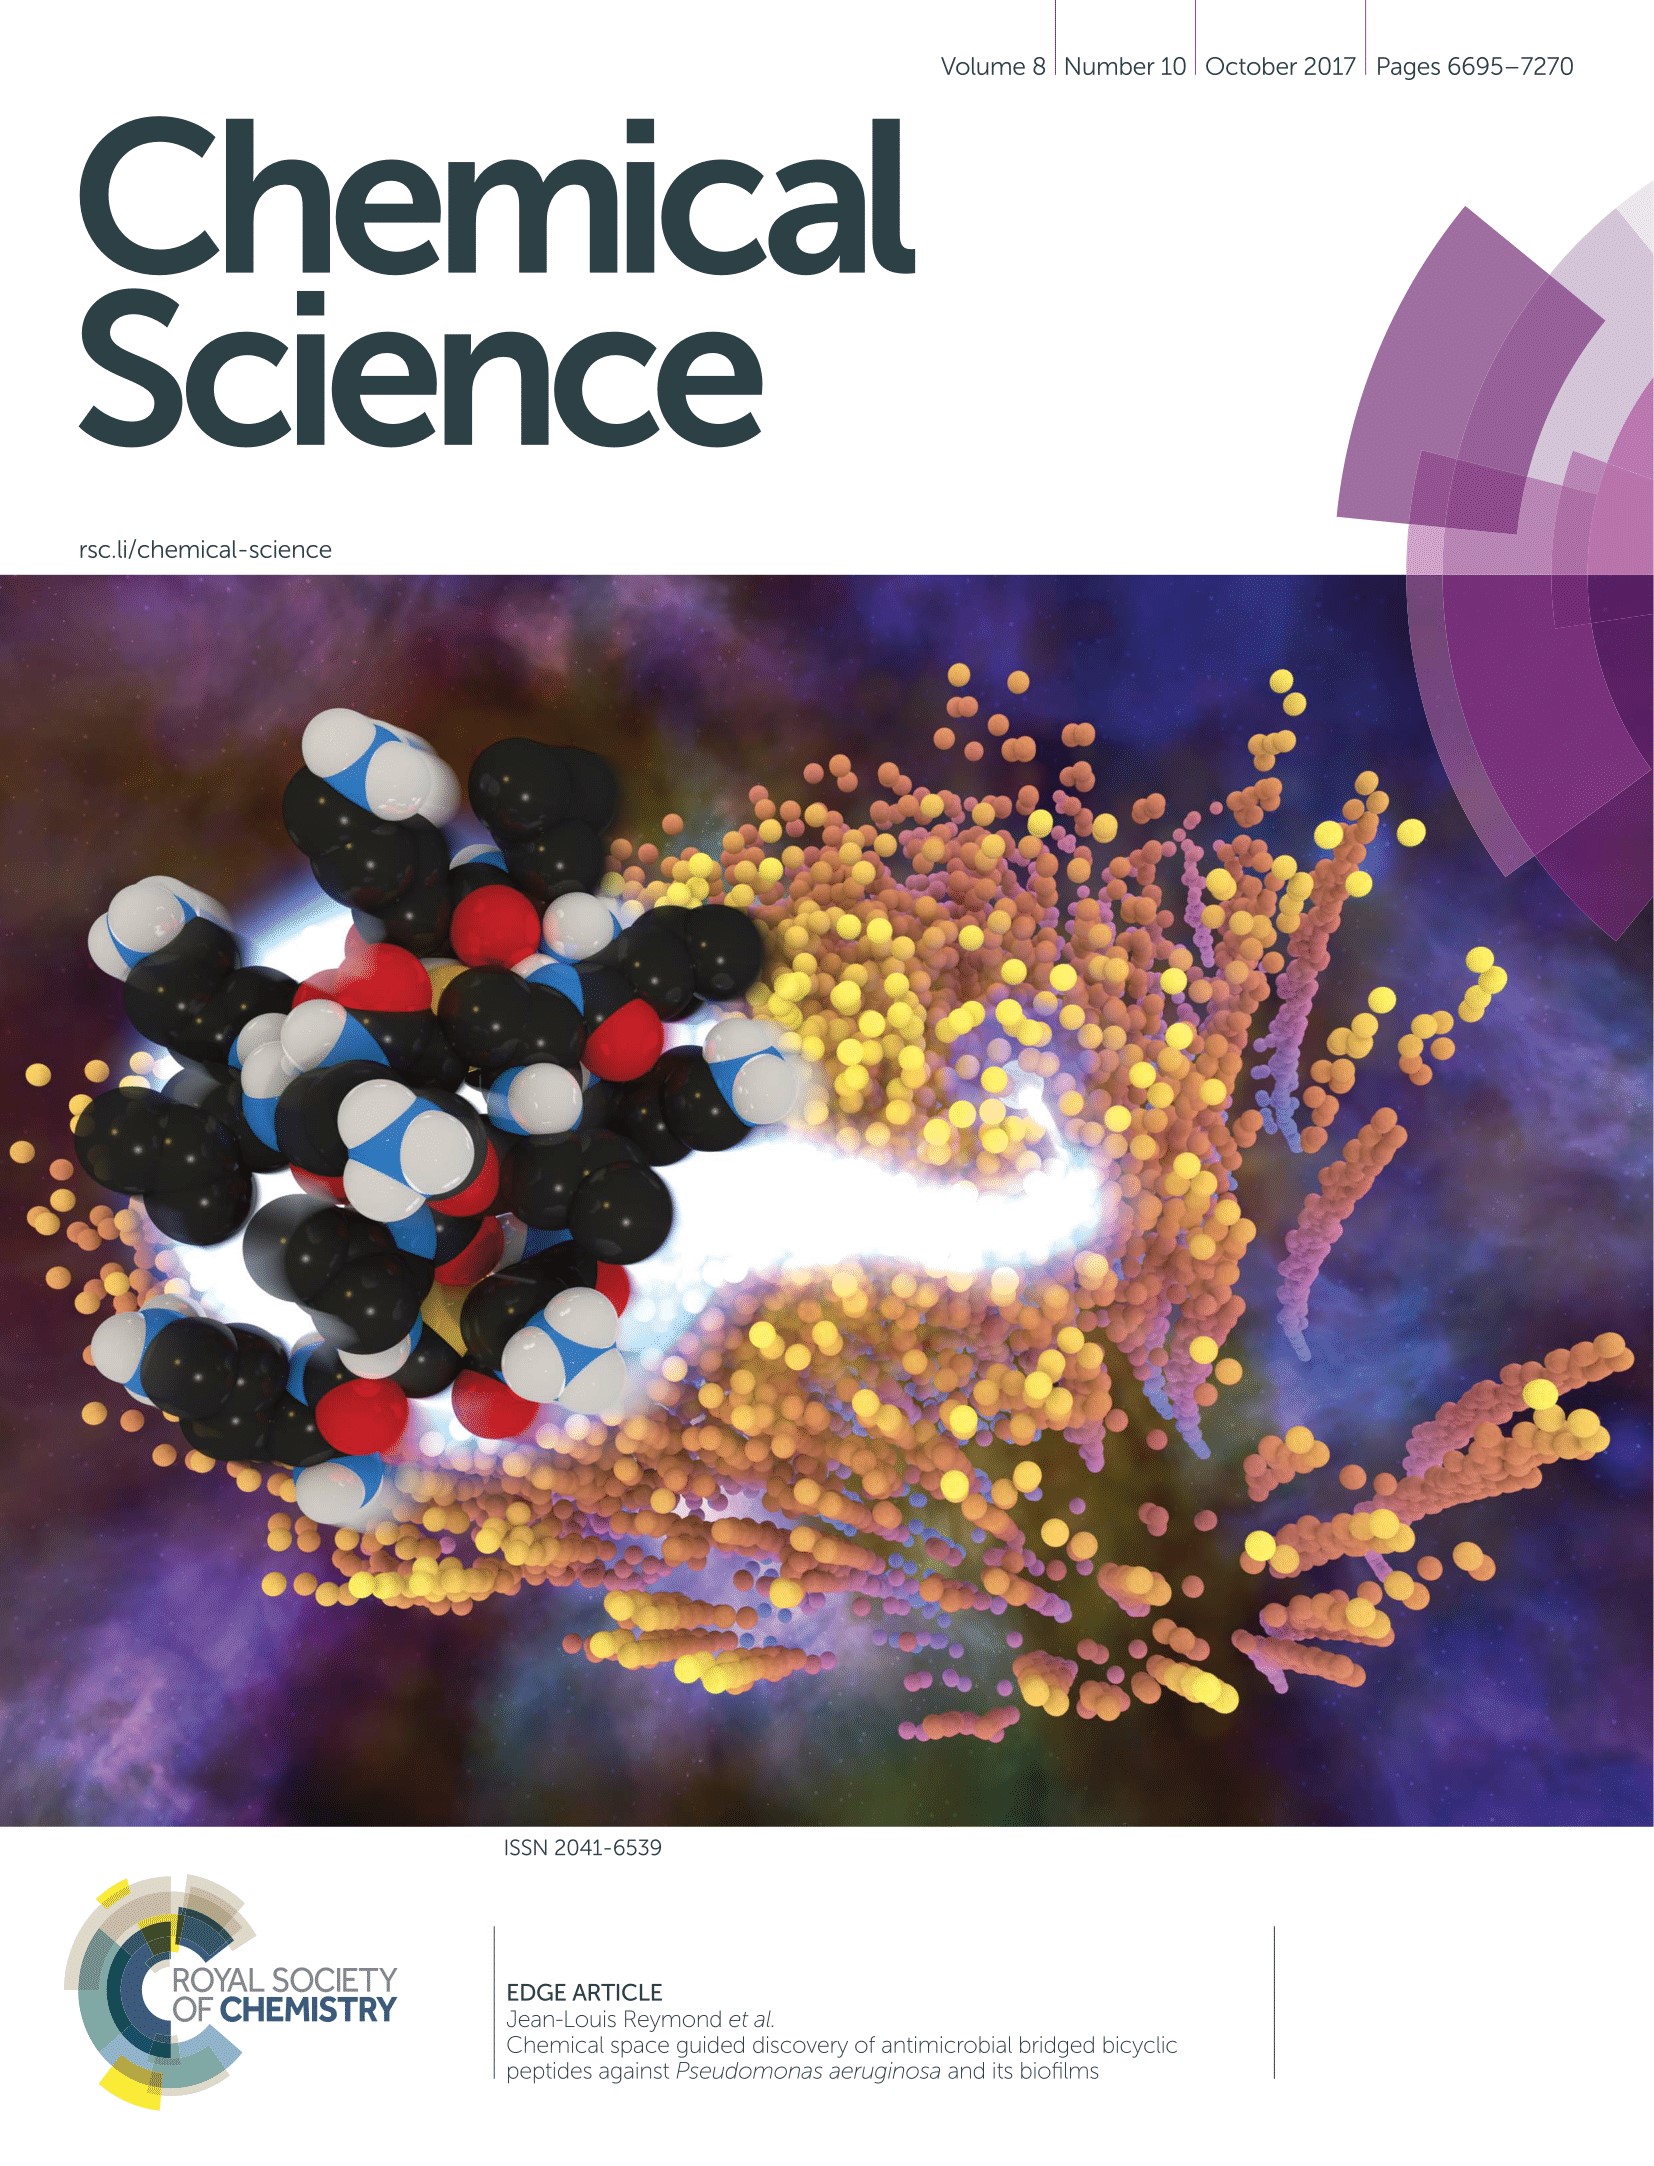 Journal Cover: Chemical space guided discovery of antimicrobial bridged ...